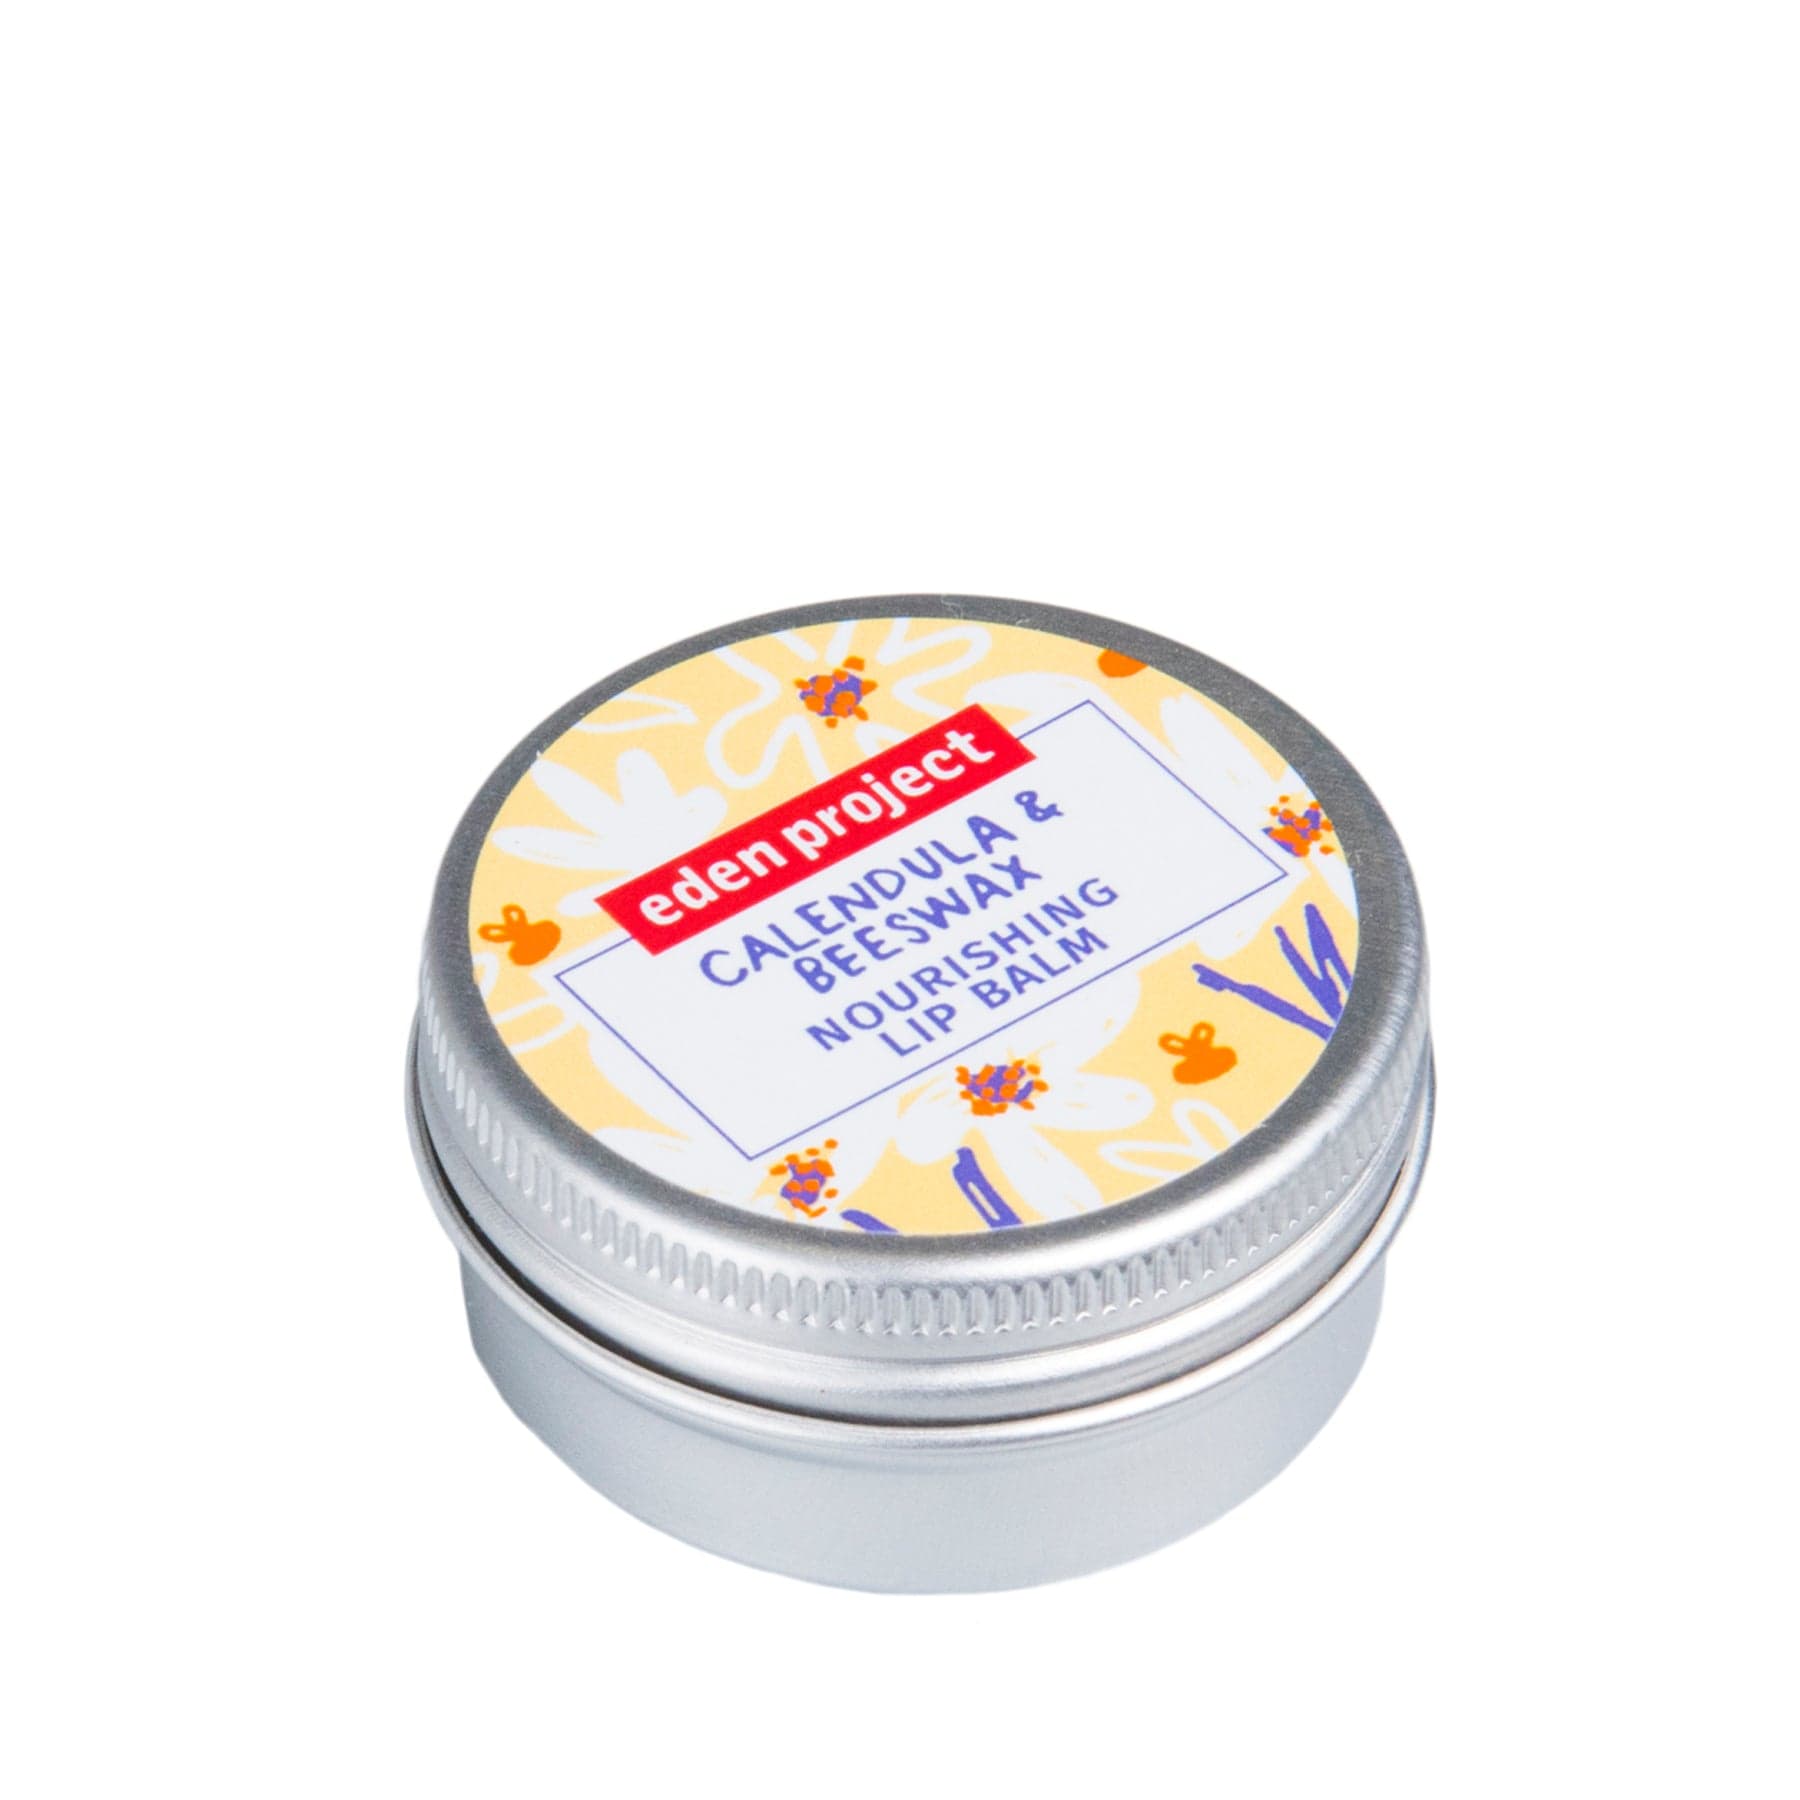 Eden Project Calendula & Beeswax Nourishing Lip Balm in a silver tin with floral design on white background